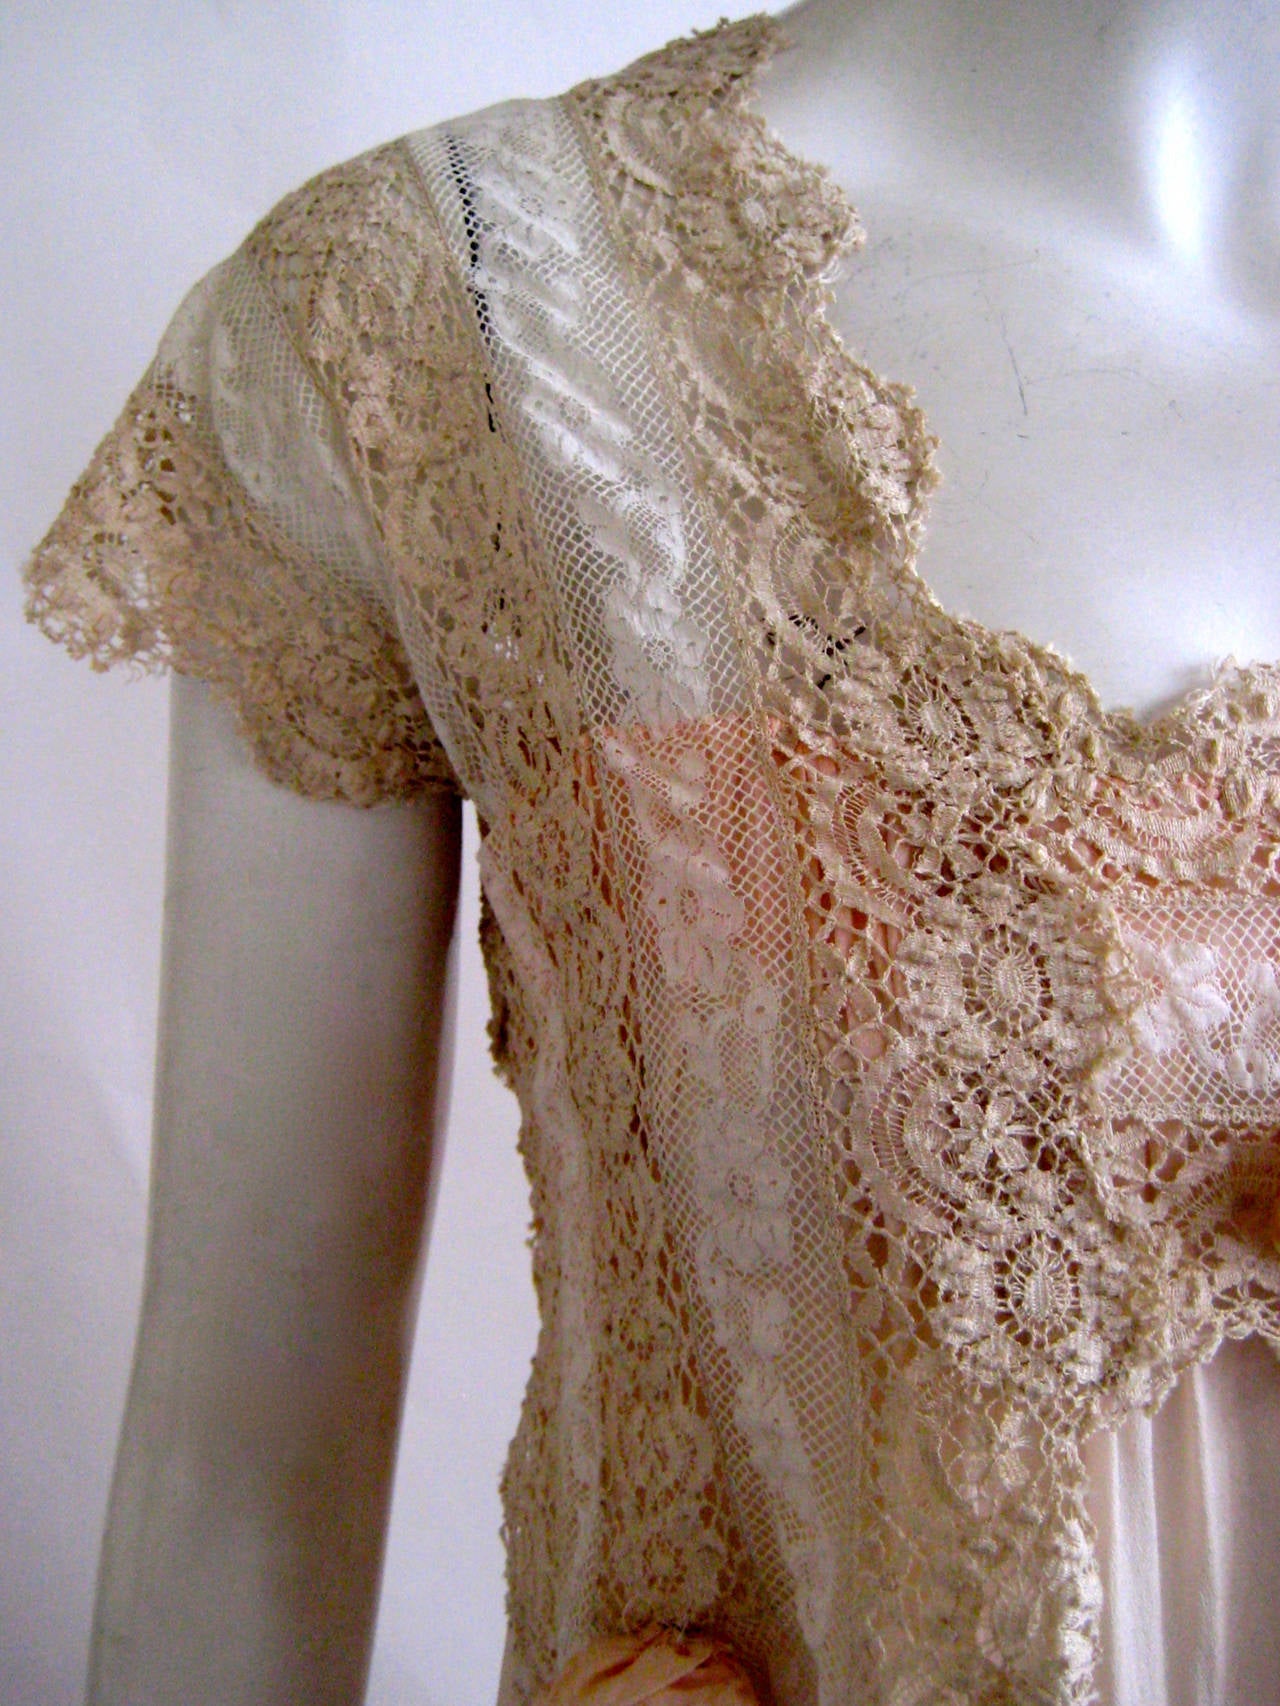 Fine palest pink silk with handmade irish crochet lace bodice.
3 pale pink flowers with silk centers adorn the lace
Cap sleeves
This snaps up on the left side of the bodice indicating that this was probably designed for a new mother.